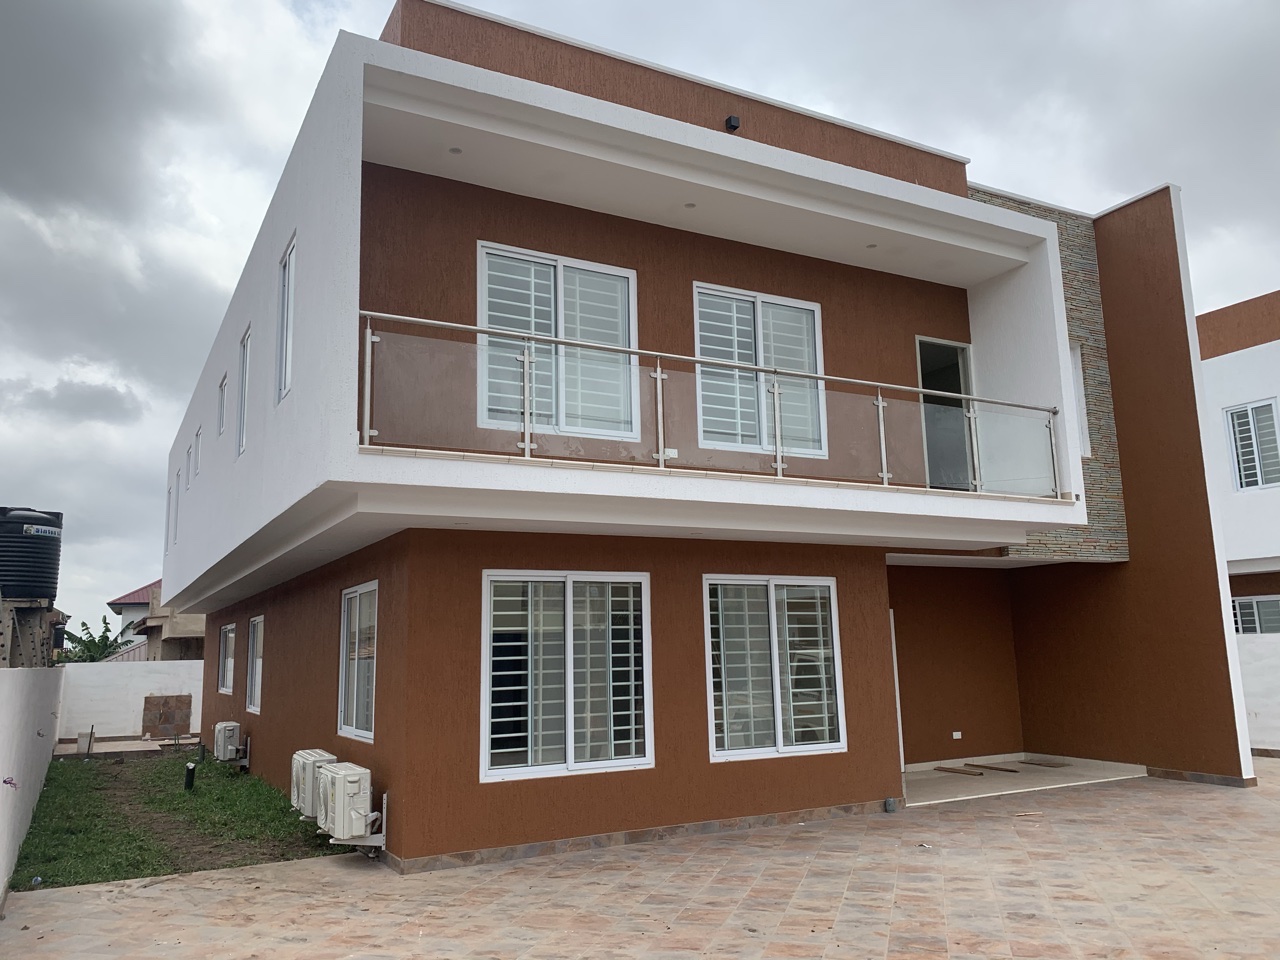 5 bedroom house with security post for sale